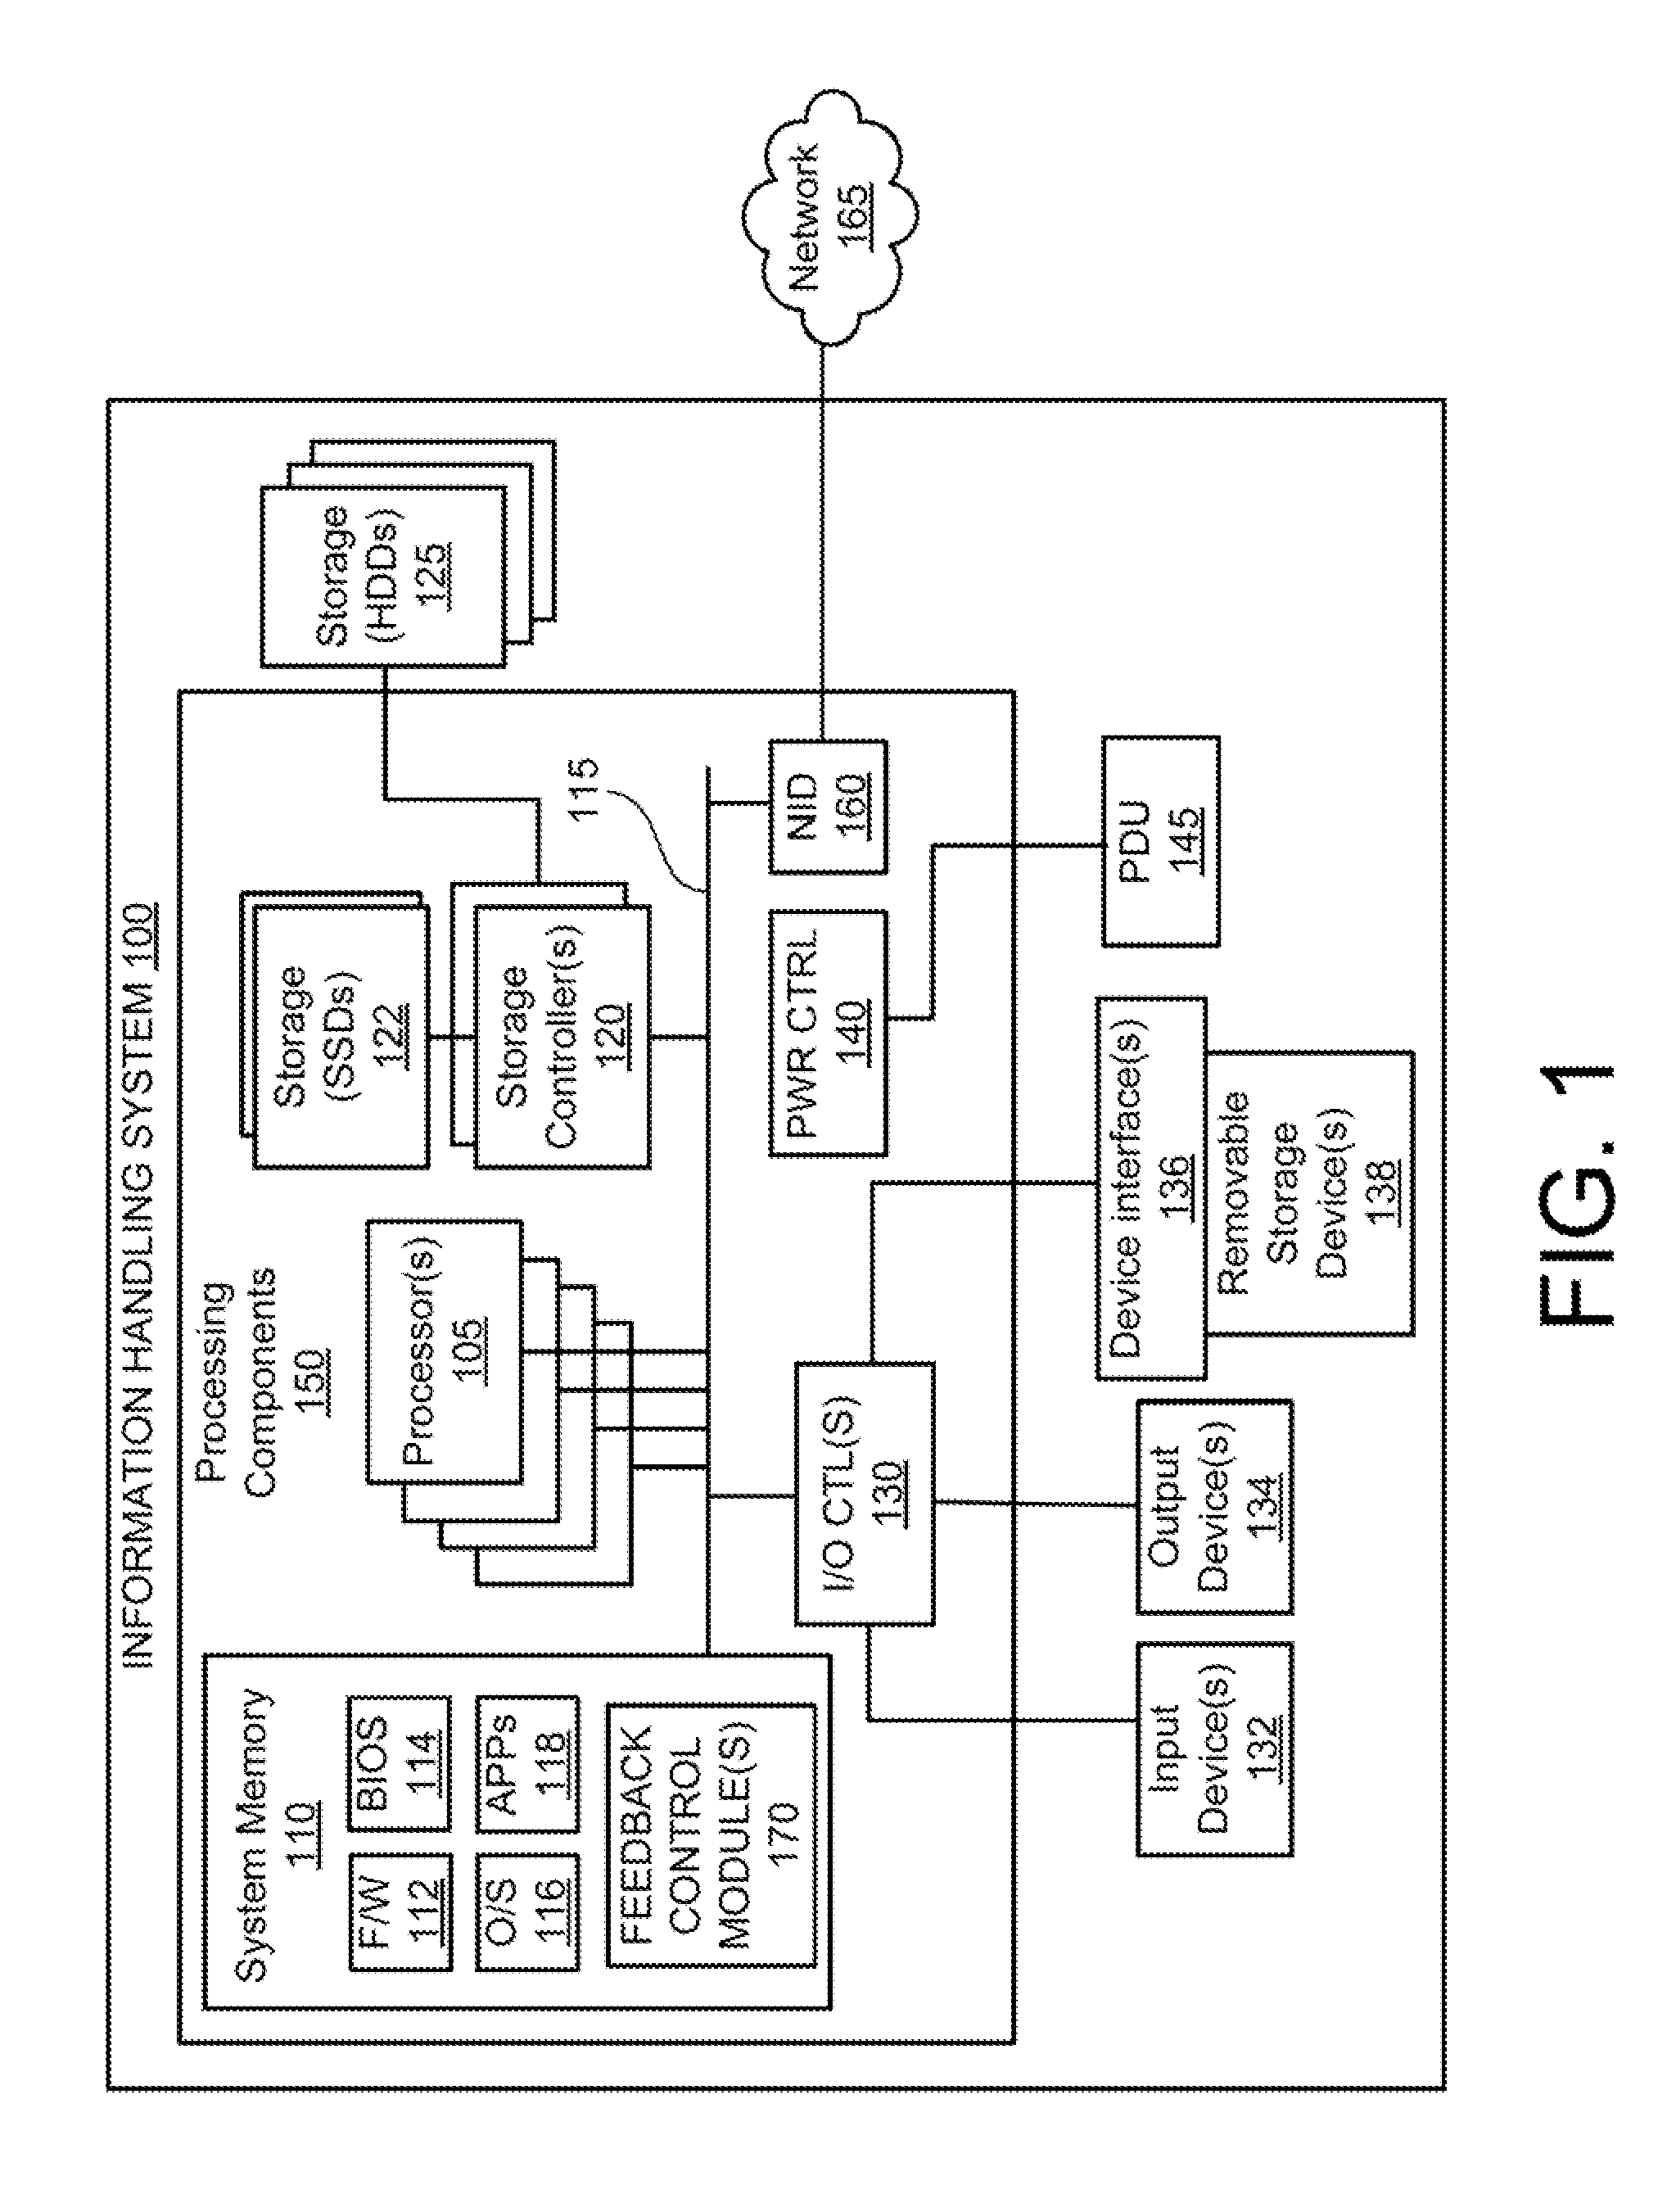 Scalable, Multi-Vessel Distribution System for Liquid Level Control Within Immersion Cooling Tanks